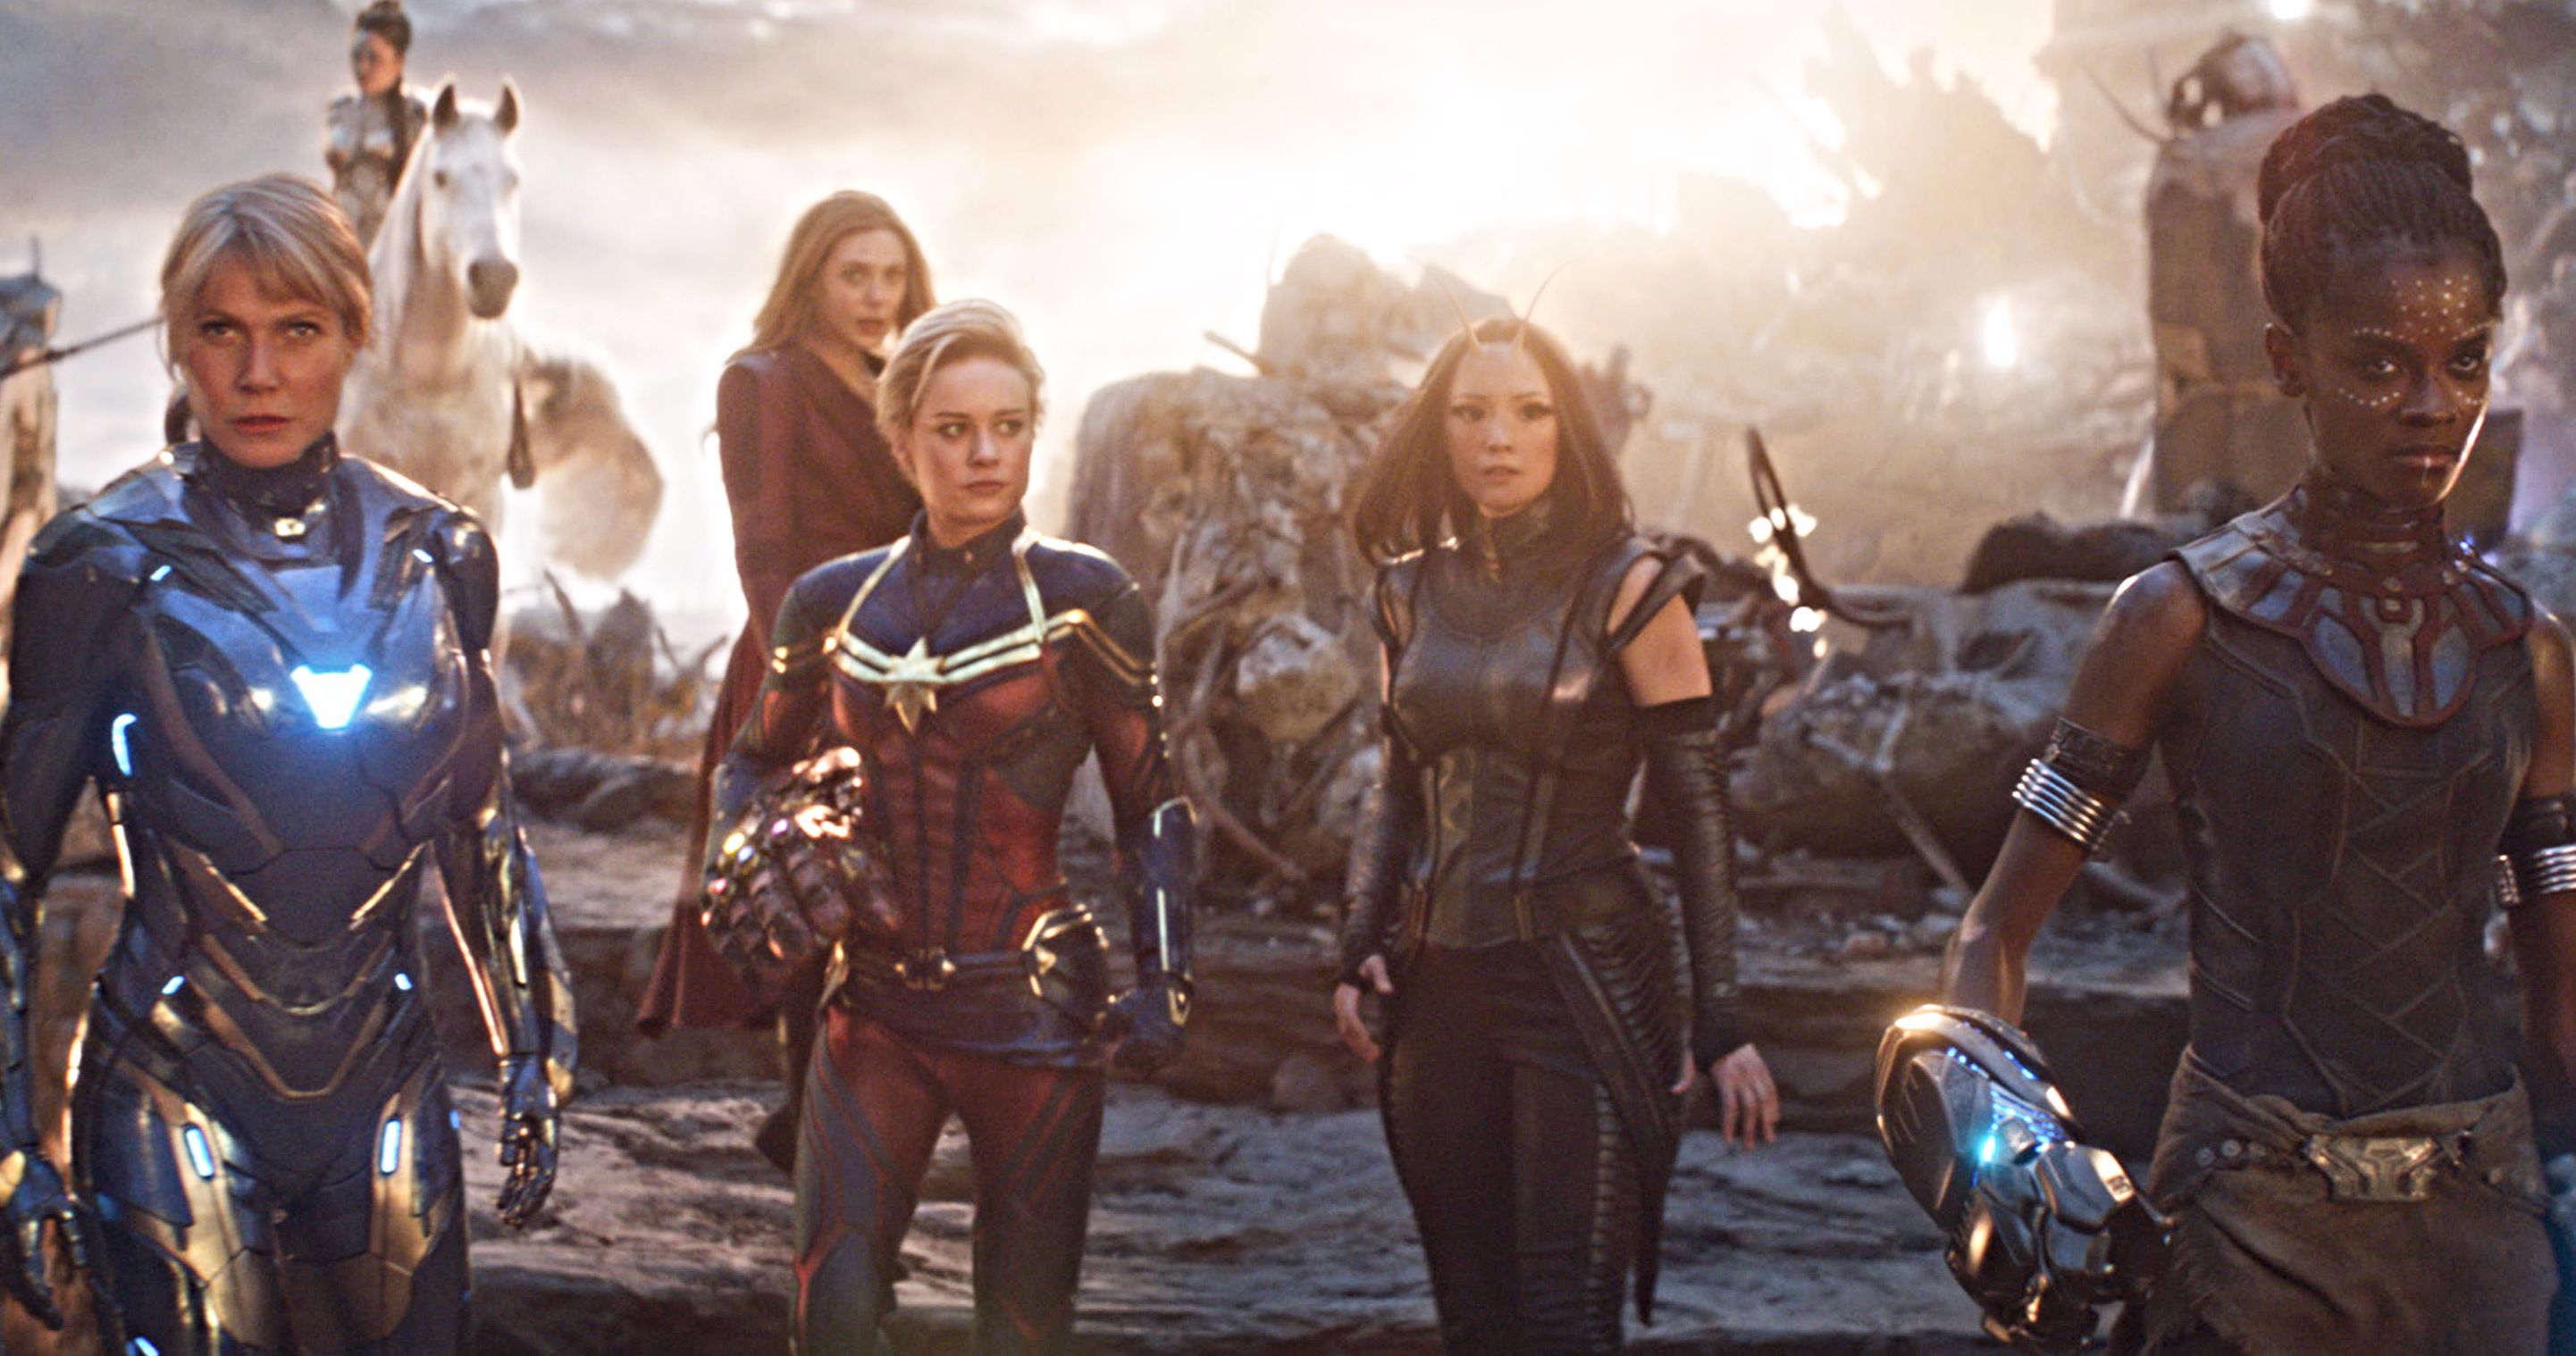 Brie Larson and Her Female Marvel Co-Stars Really Want an All-Women MCU Movie